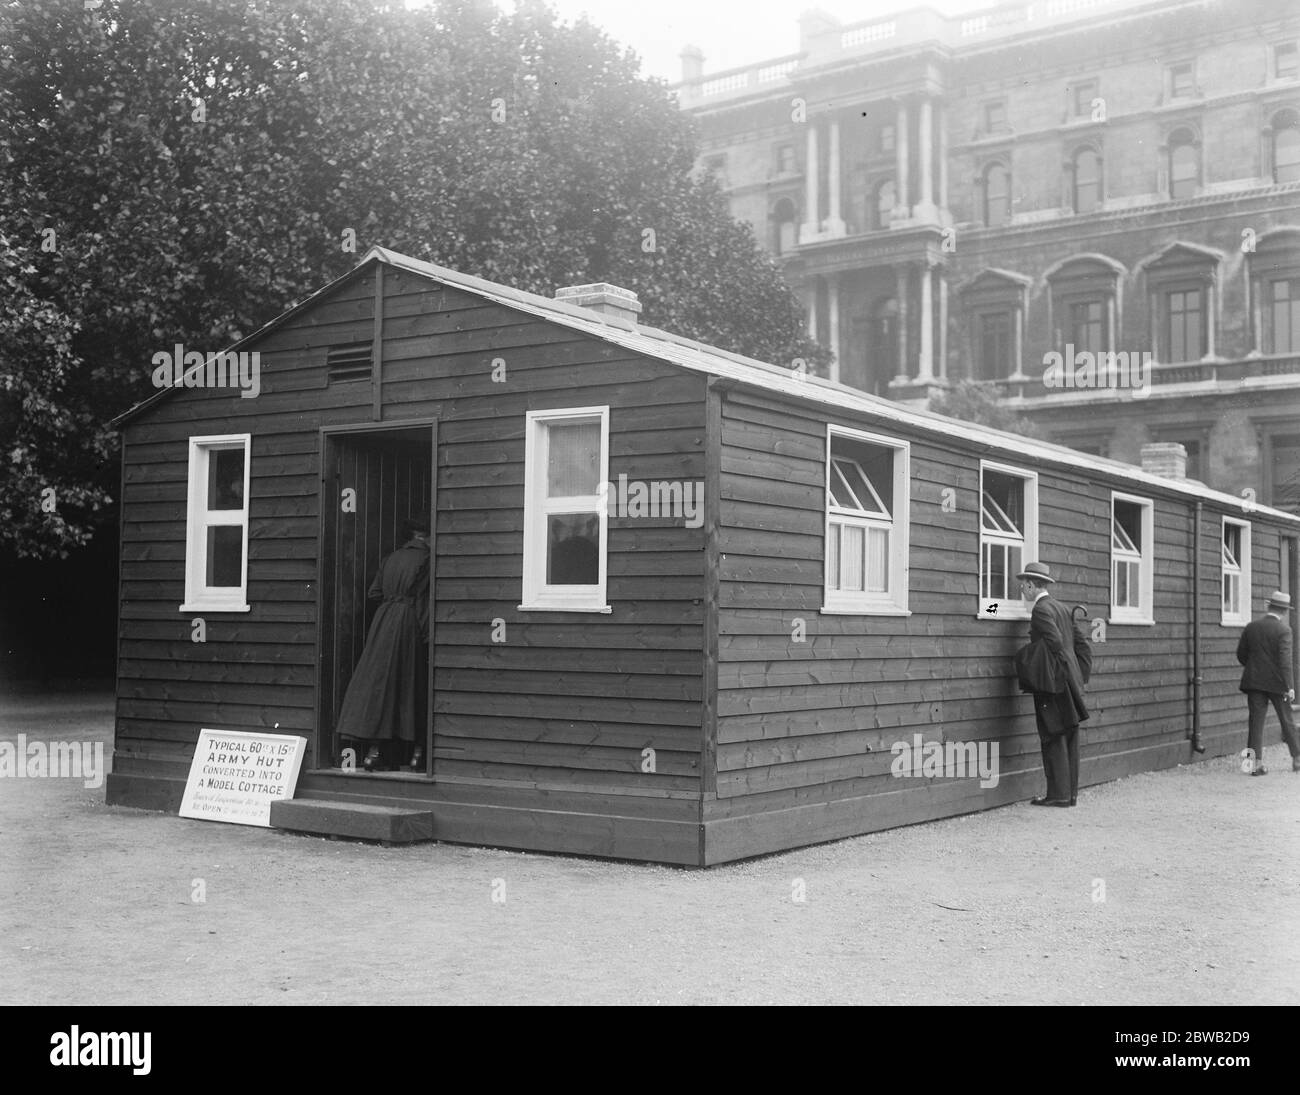 Army huts as new homes An army hut on the Horse Guards Parade converted into a comfortable home , by government as an example of its possibilities 23 July 1919 sign reads  Typical 60ft x 15ft Army Hut converted into a model cottage Stock Photo